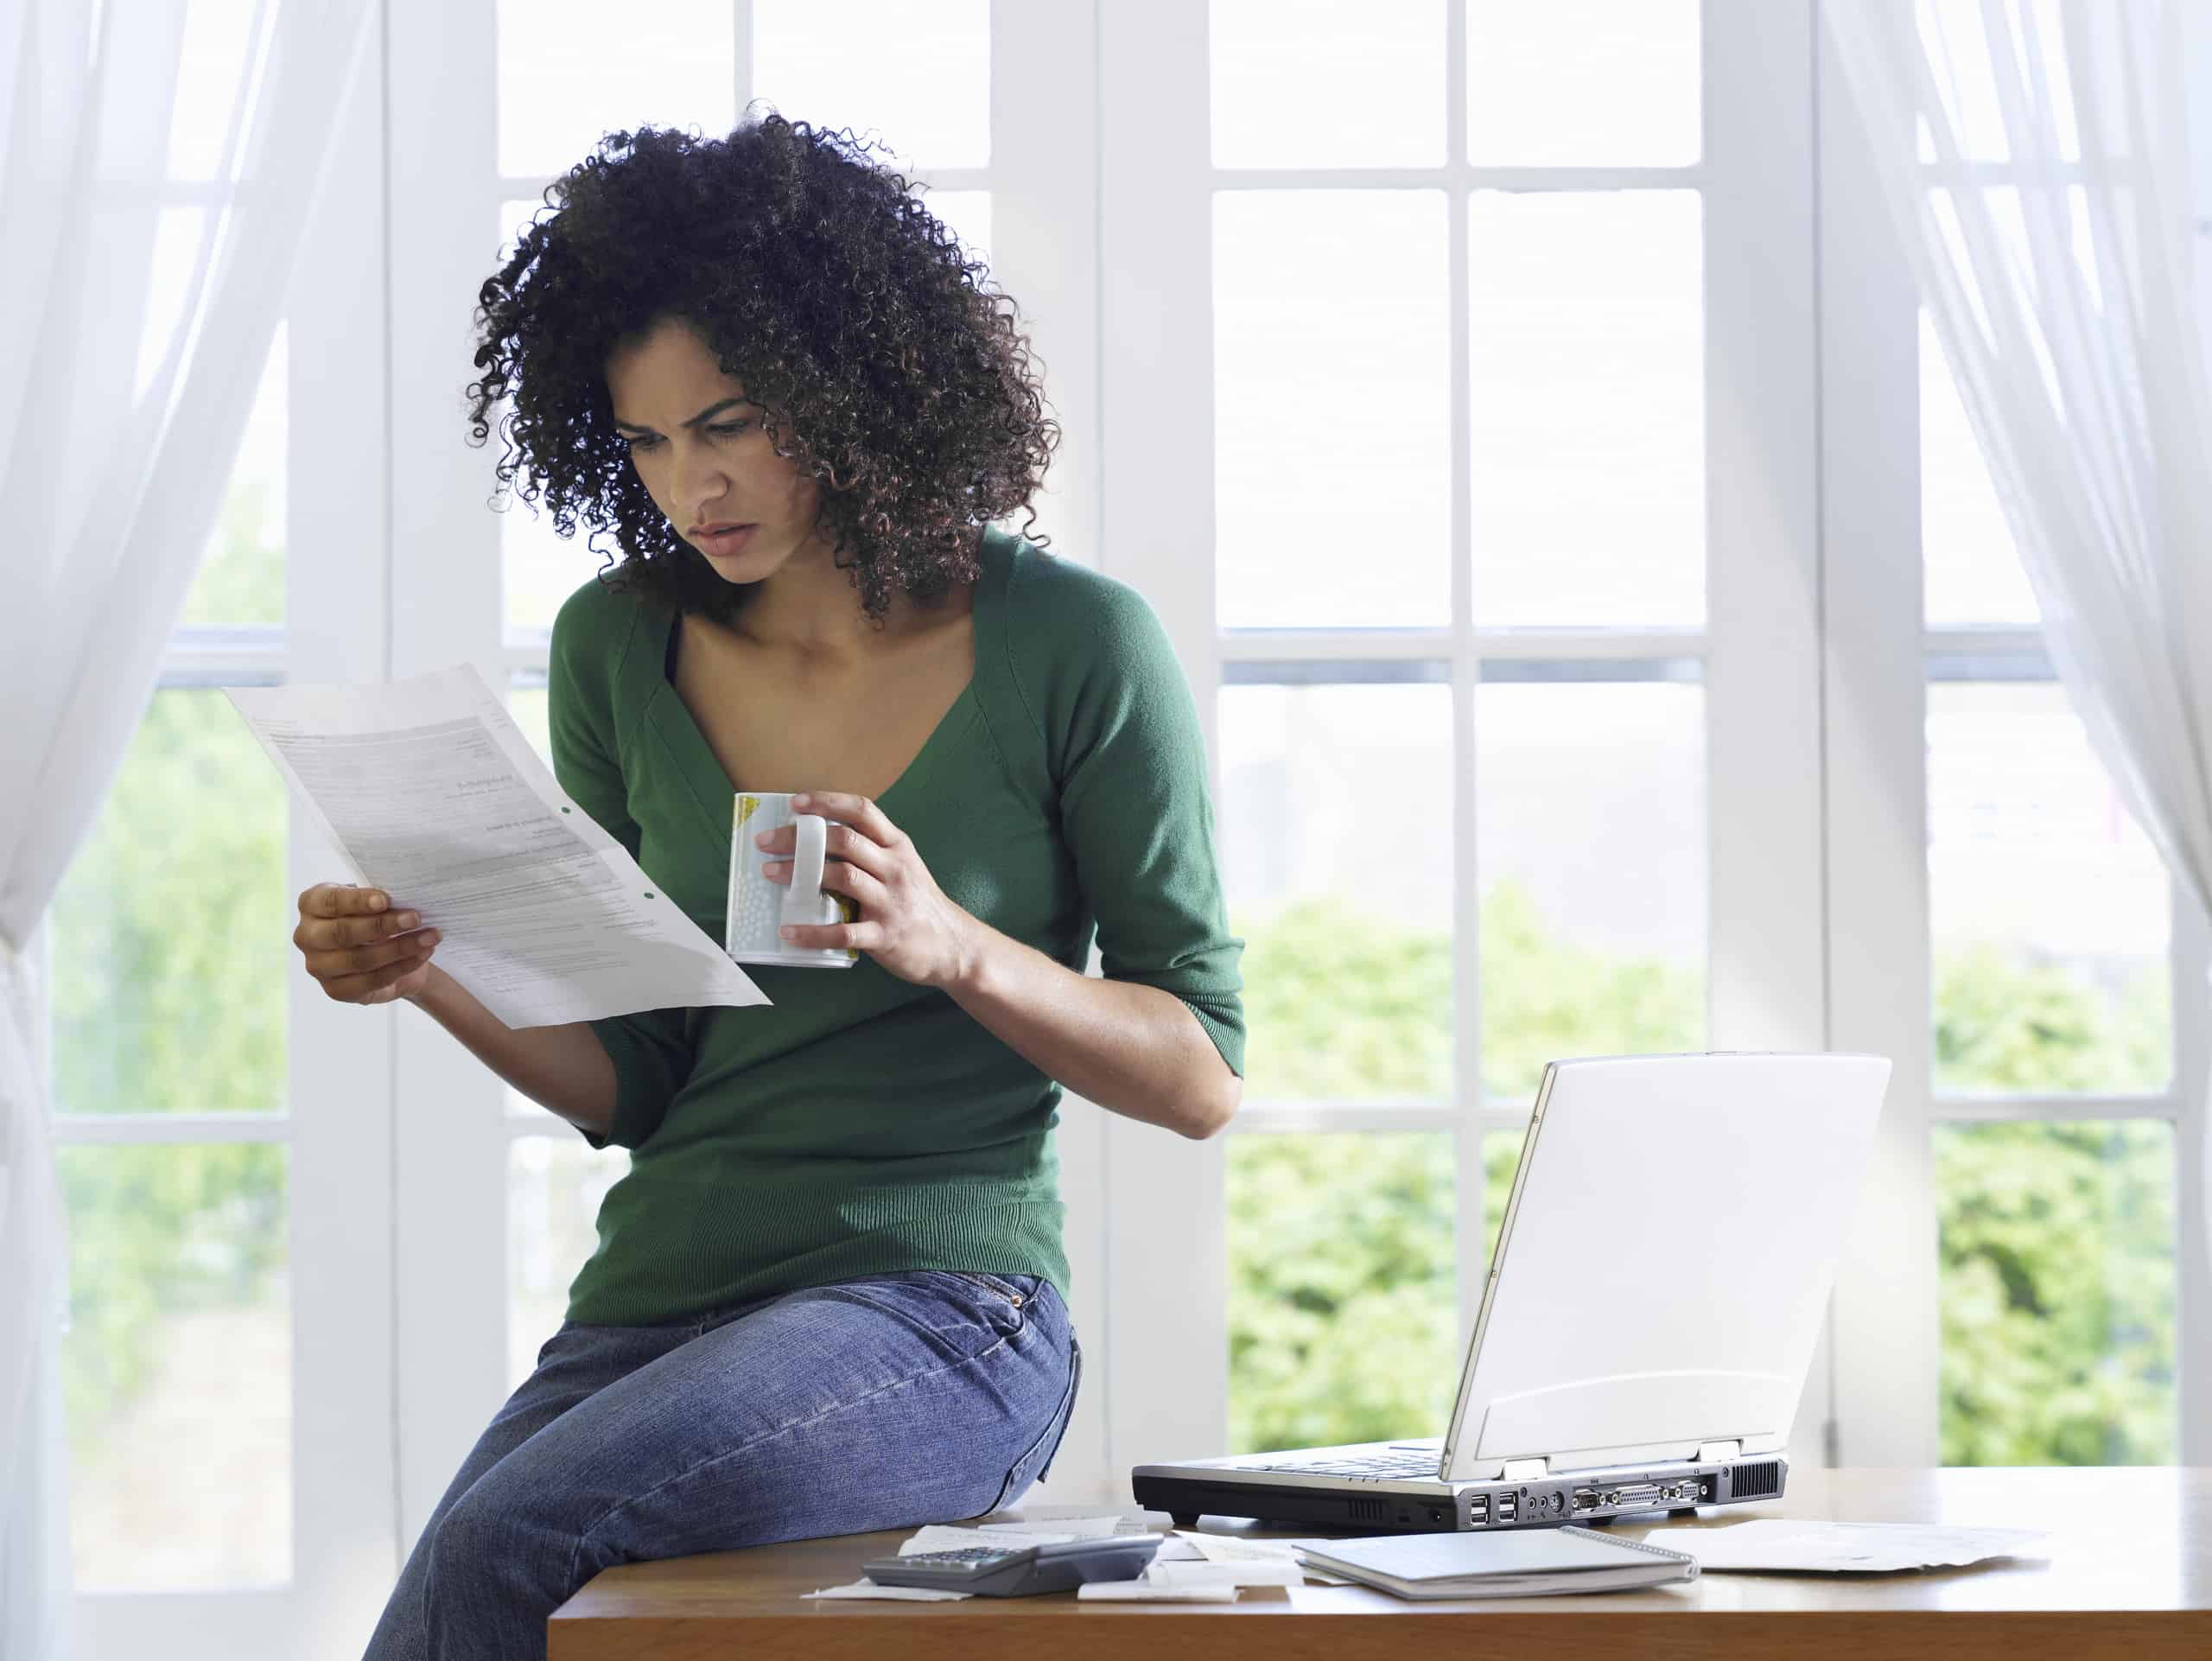 young woman with coffee mug, looking concerned at a piece of paper - wondering if someone has taken a life insurance policy out on her